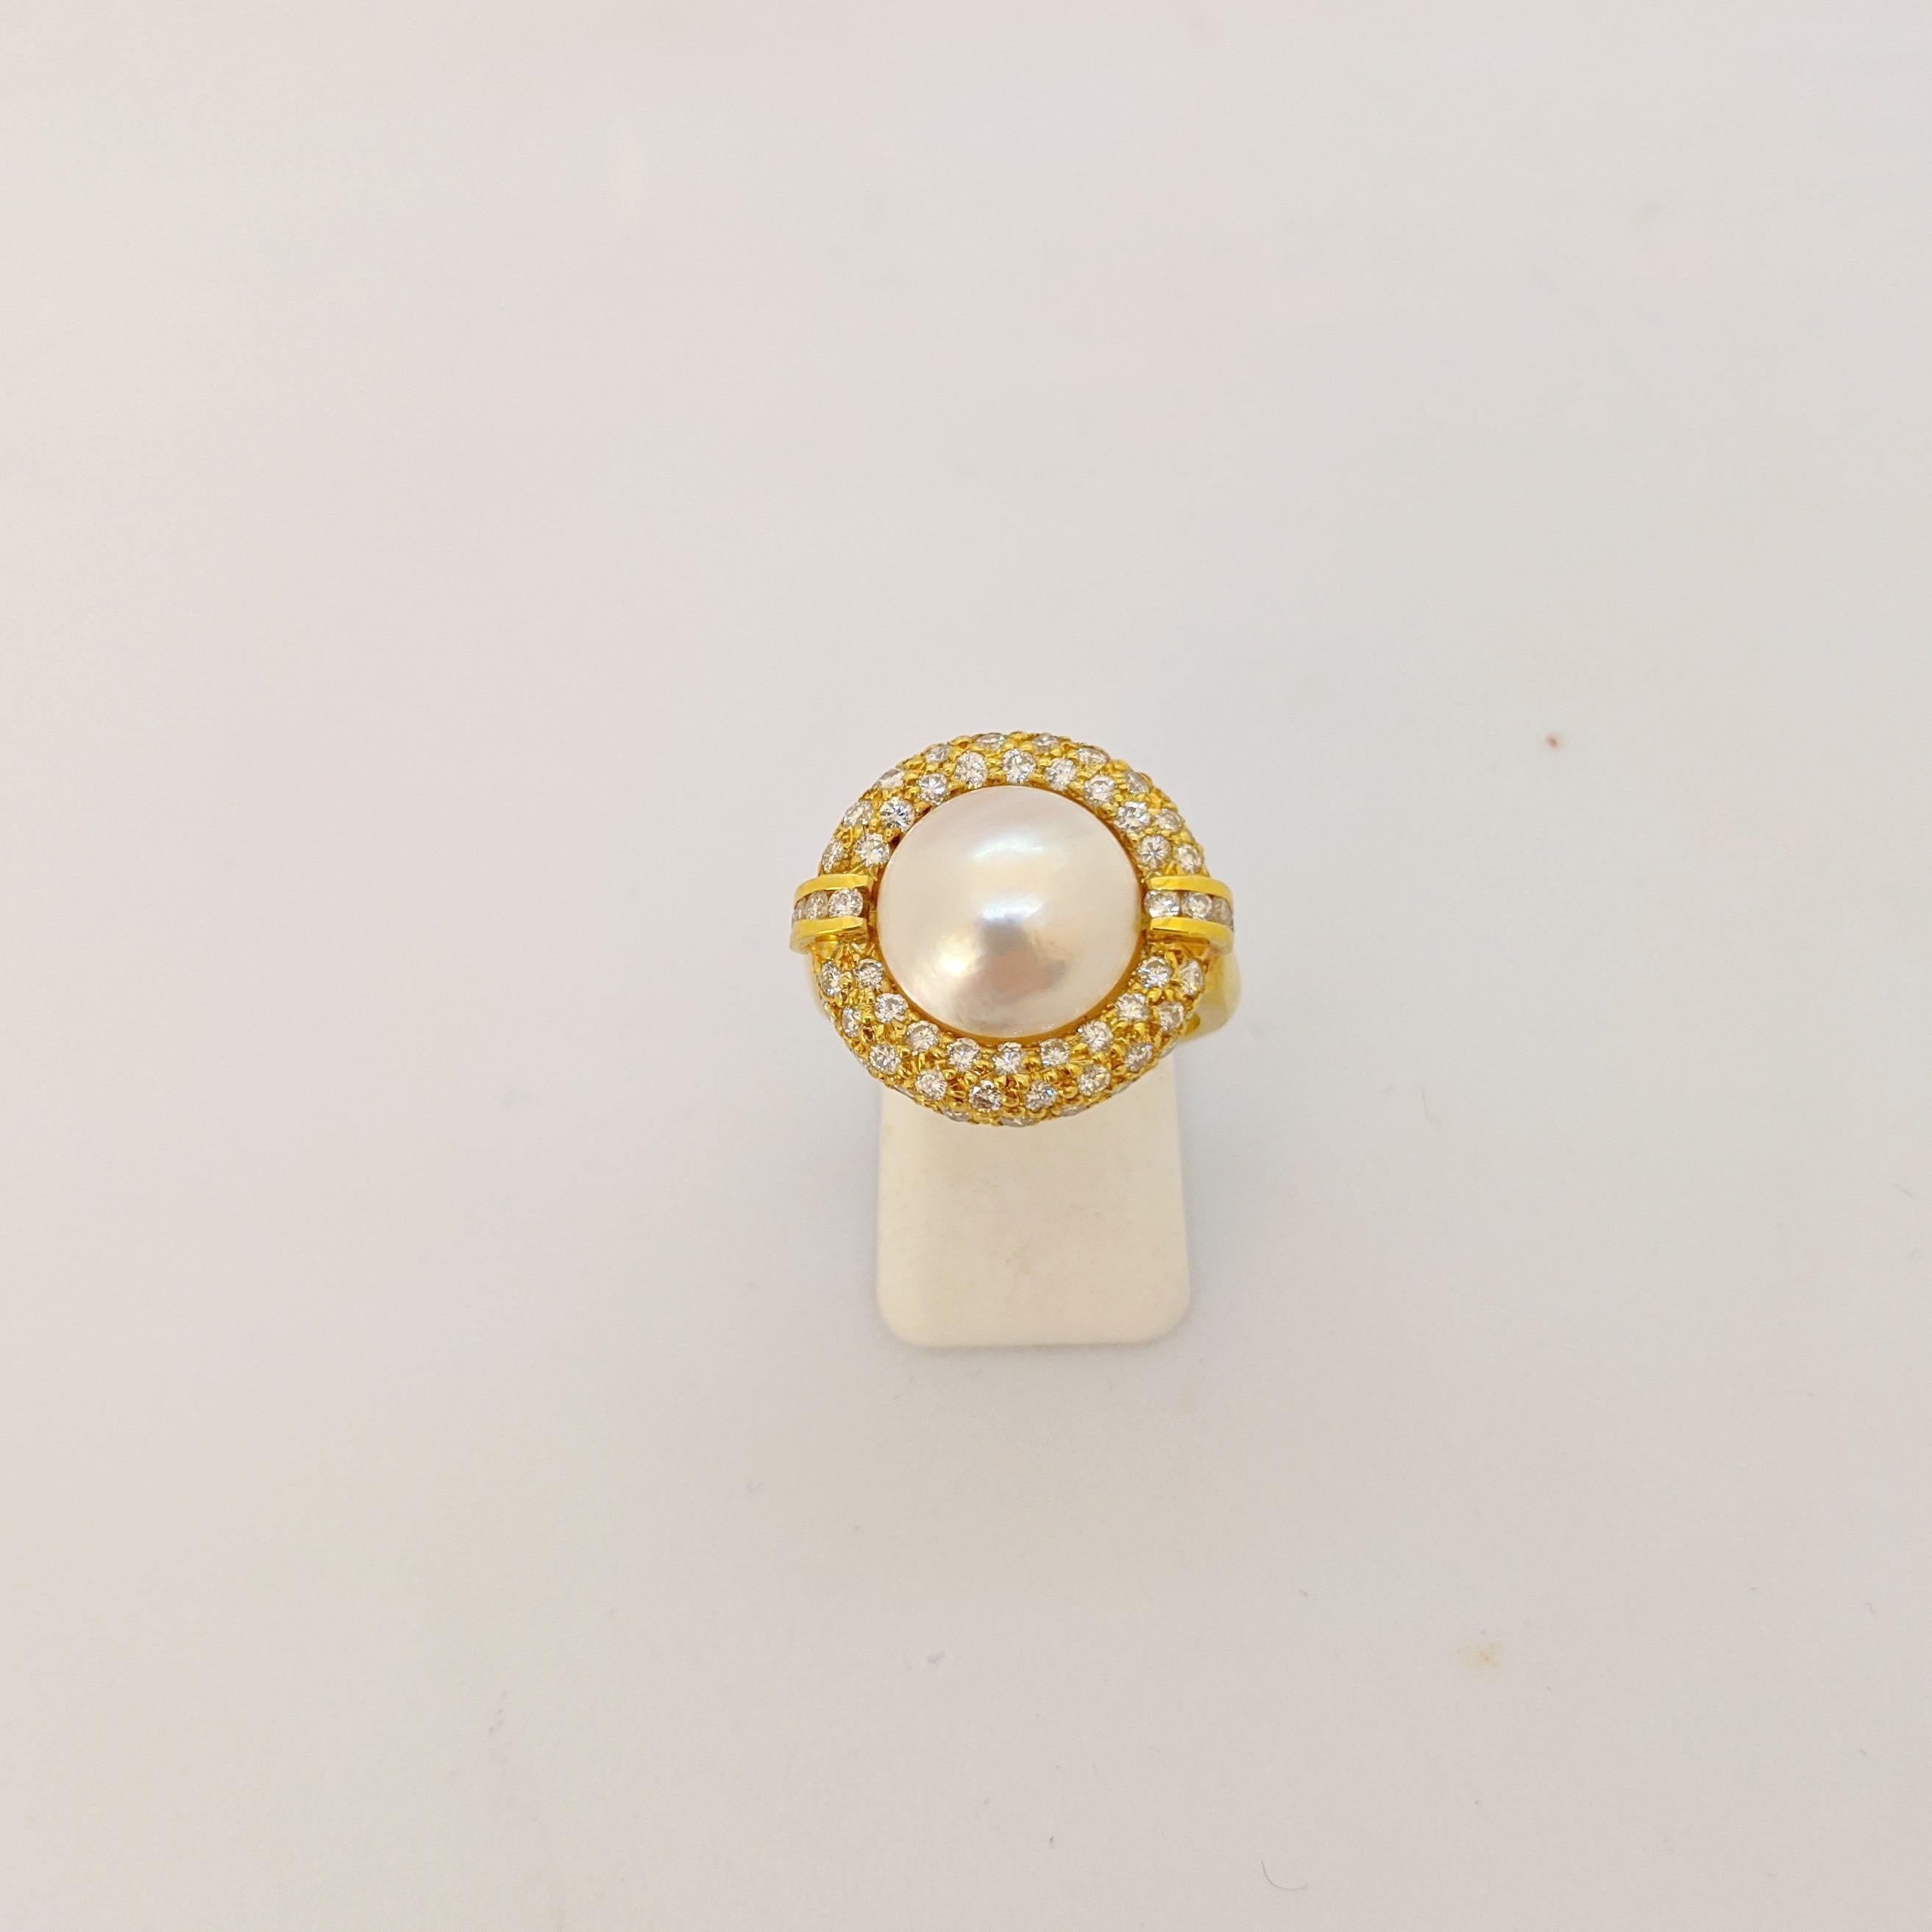 This lovely 18 karat yellow gold ring is designed with a 11mm cultured Mabe pearl center. A pave diamond halo surrounds the pearl.
Total diamond weight 1.45 carats
Ring size 6 7/8 sizing options may be available
Stamped 18KT